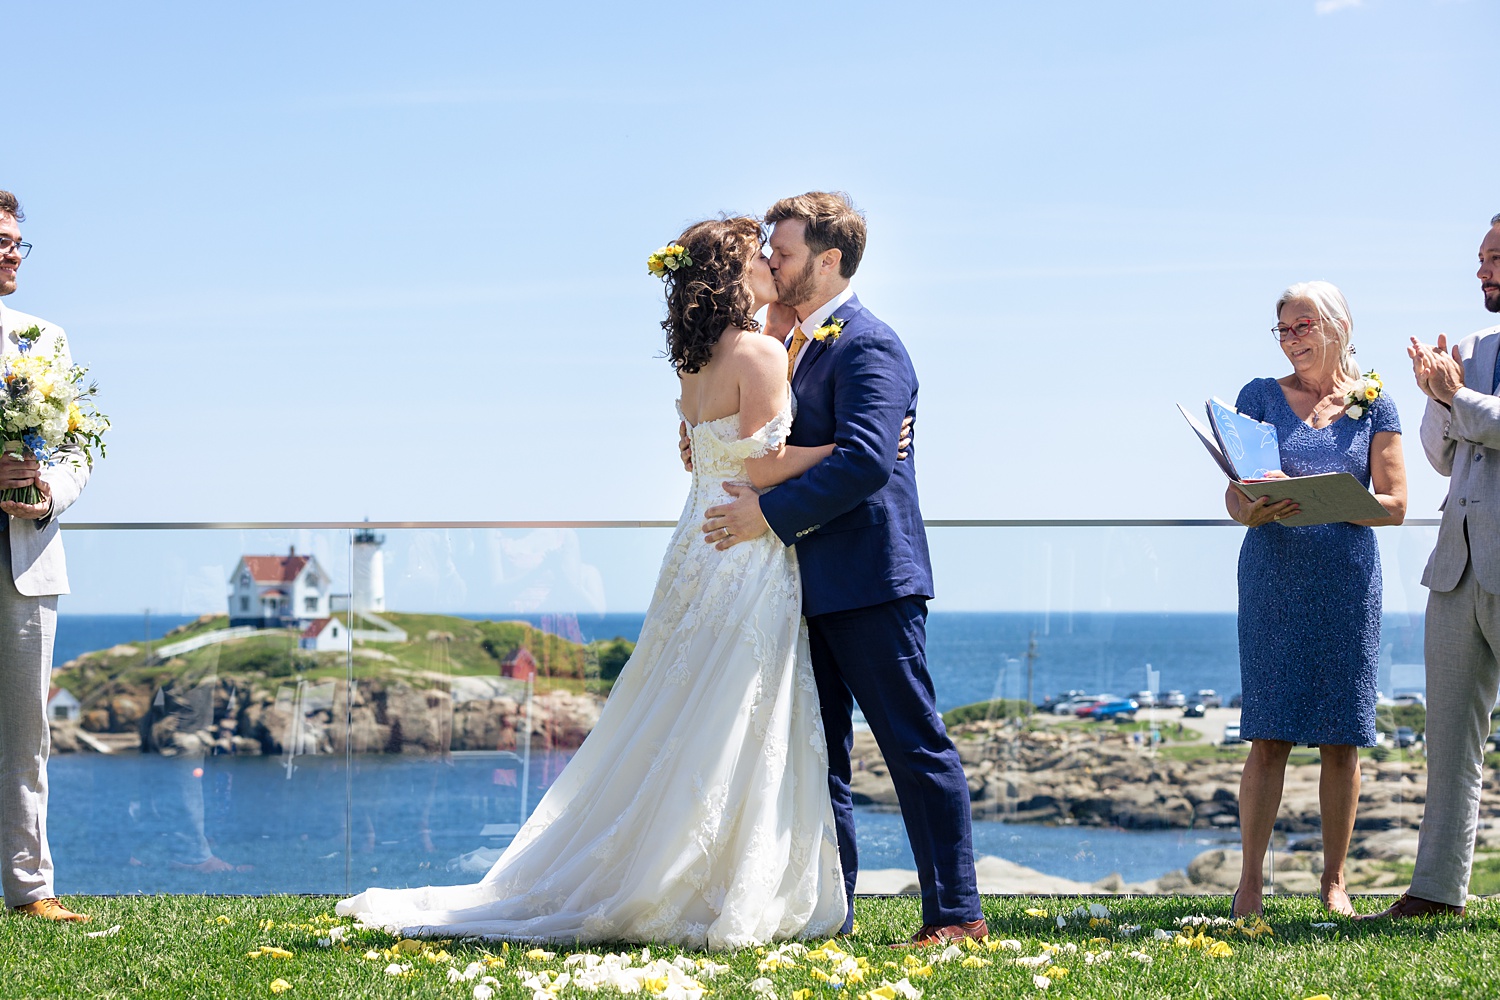 The first kiss at the end of the wedding ceremony at The Viewpoint Hotel in York Maine